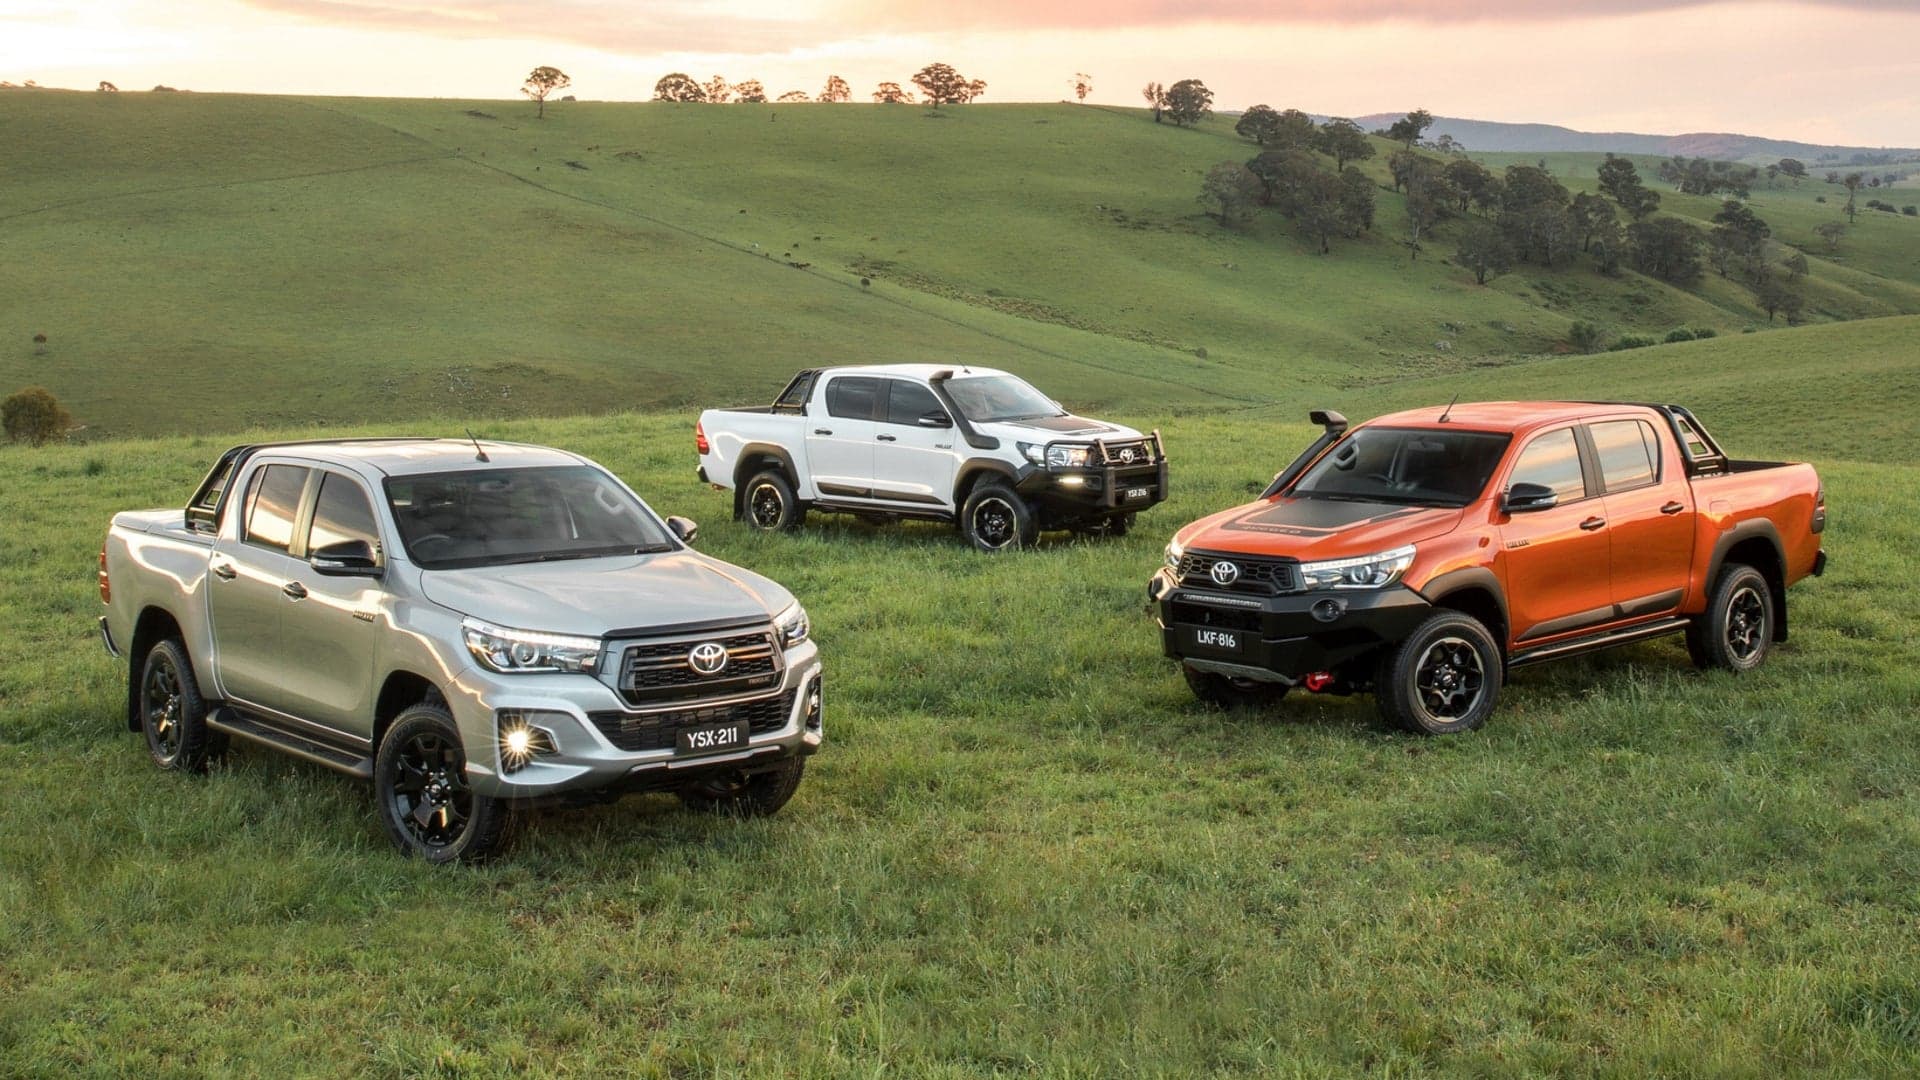 Check out These Rad Toyota HiLux Trucks We Can’t Have in the U.S.